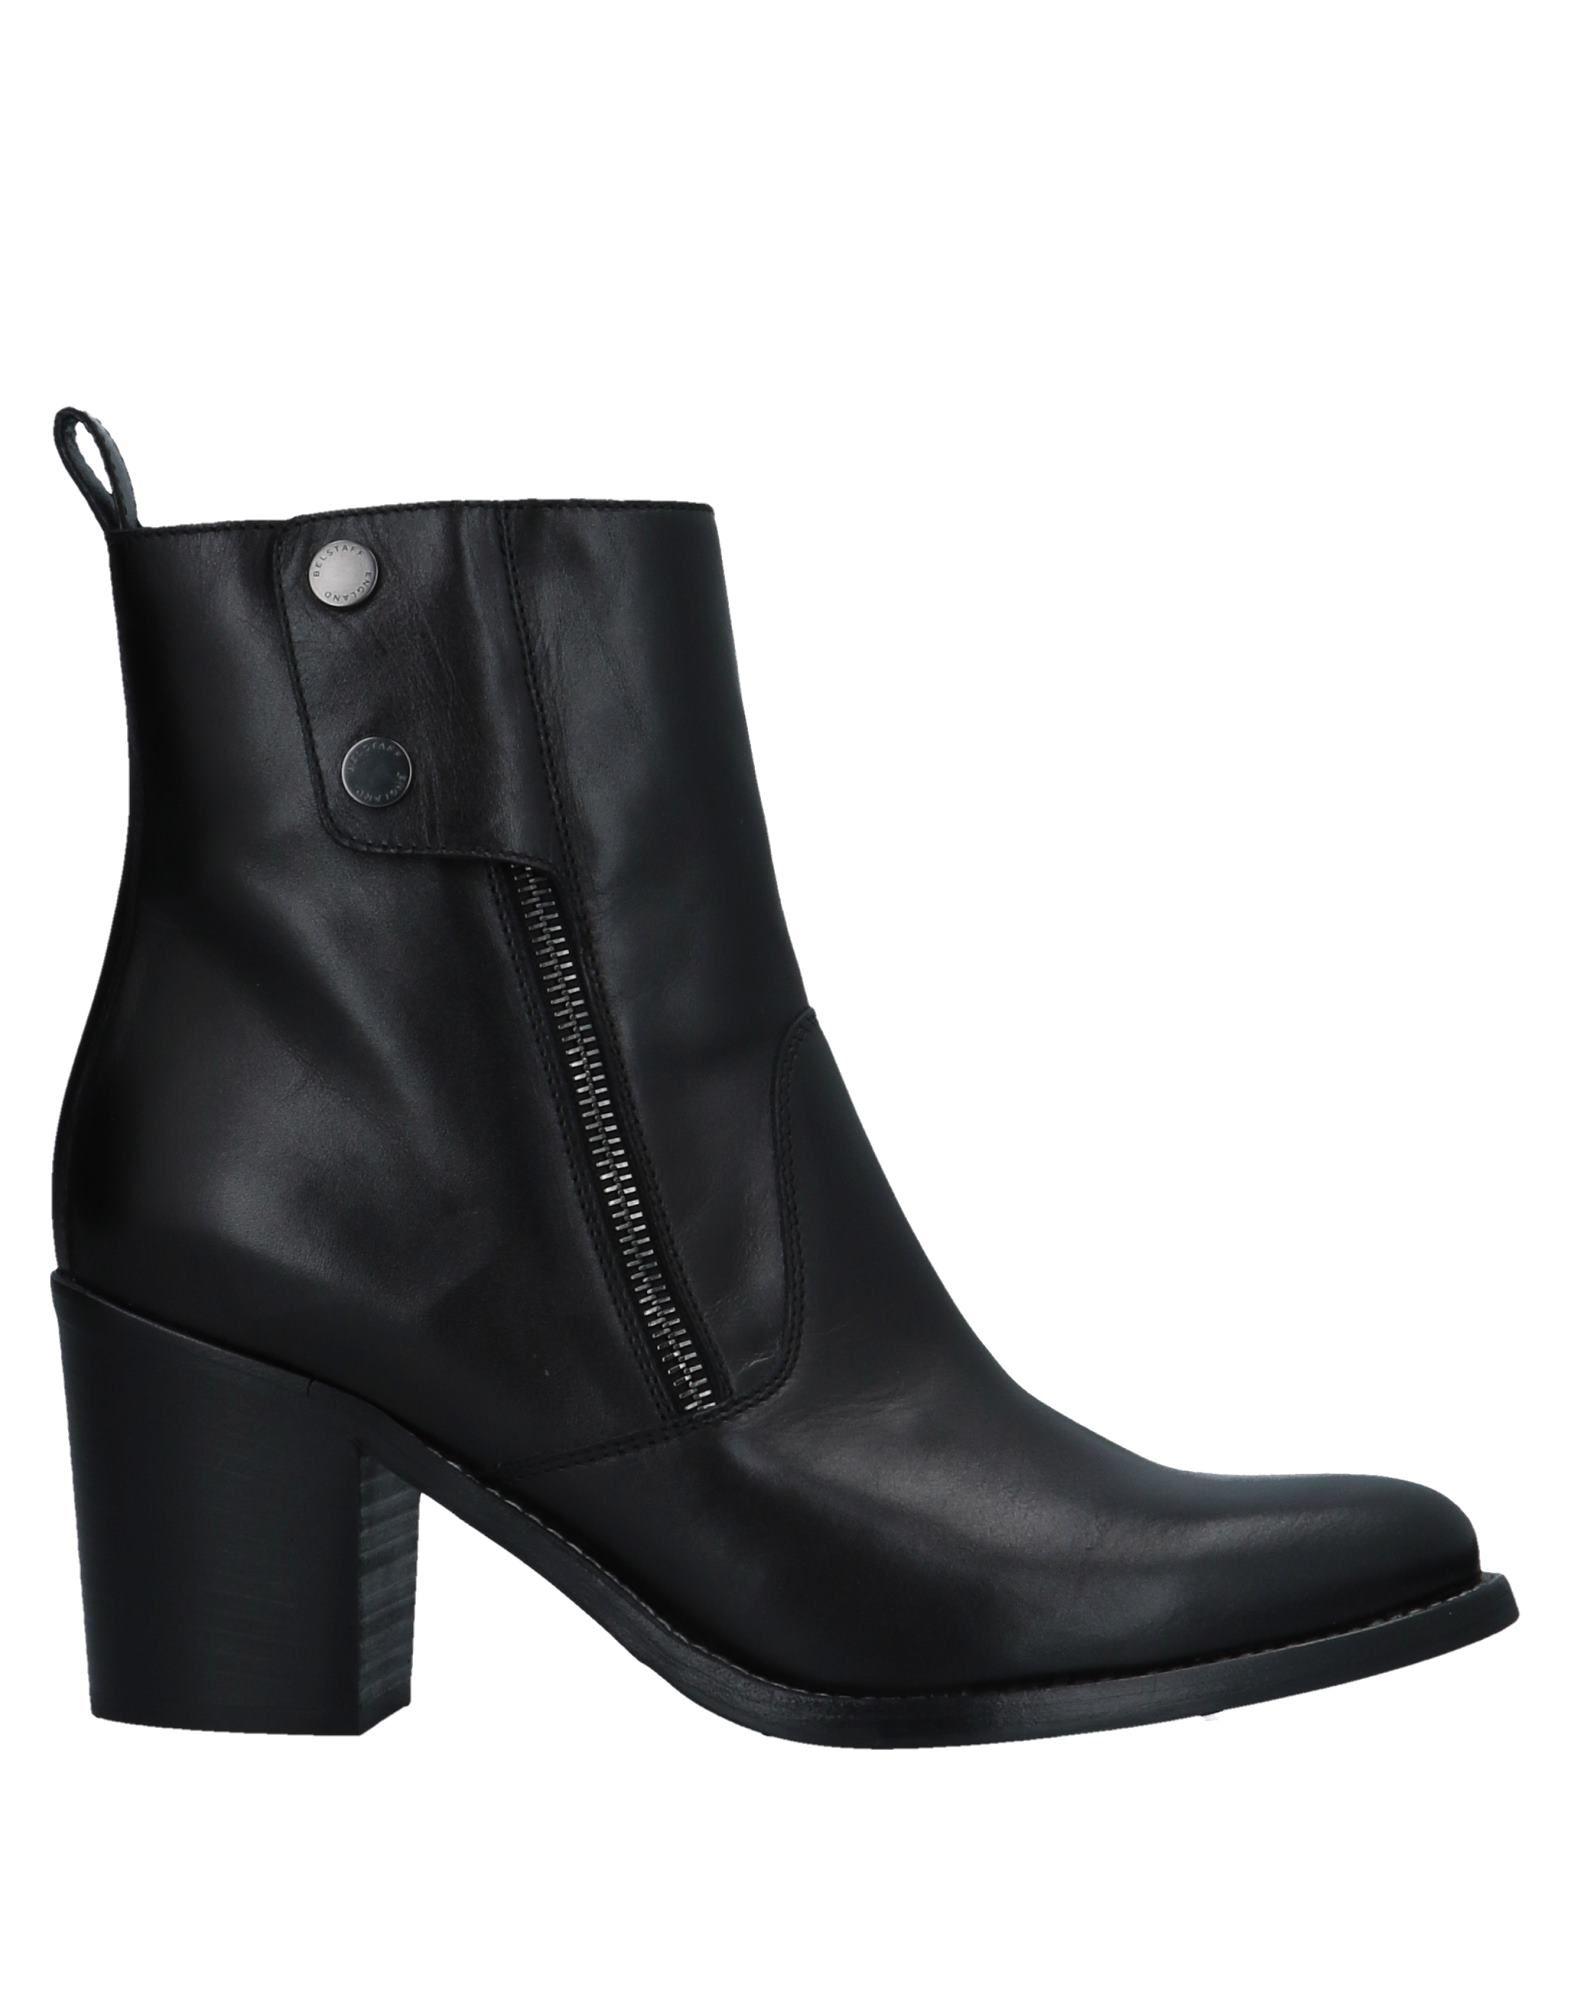 belstaff ankle boots